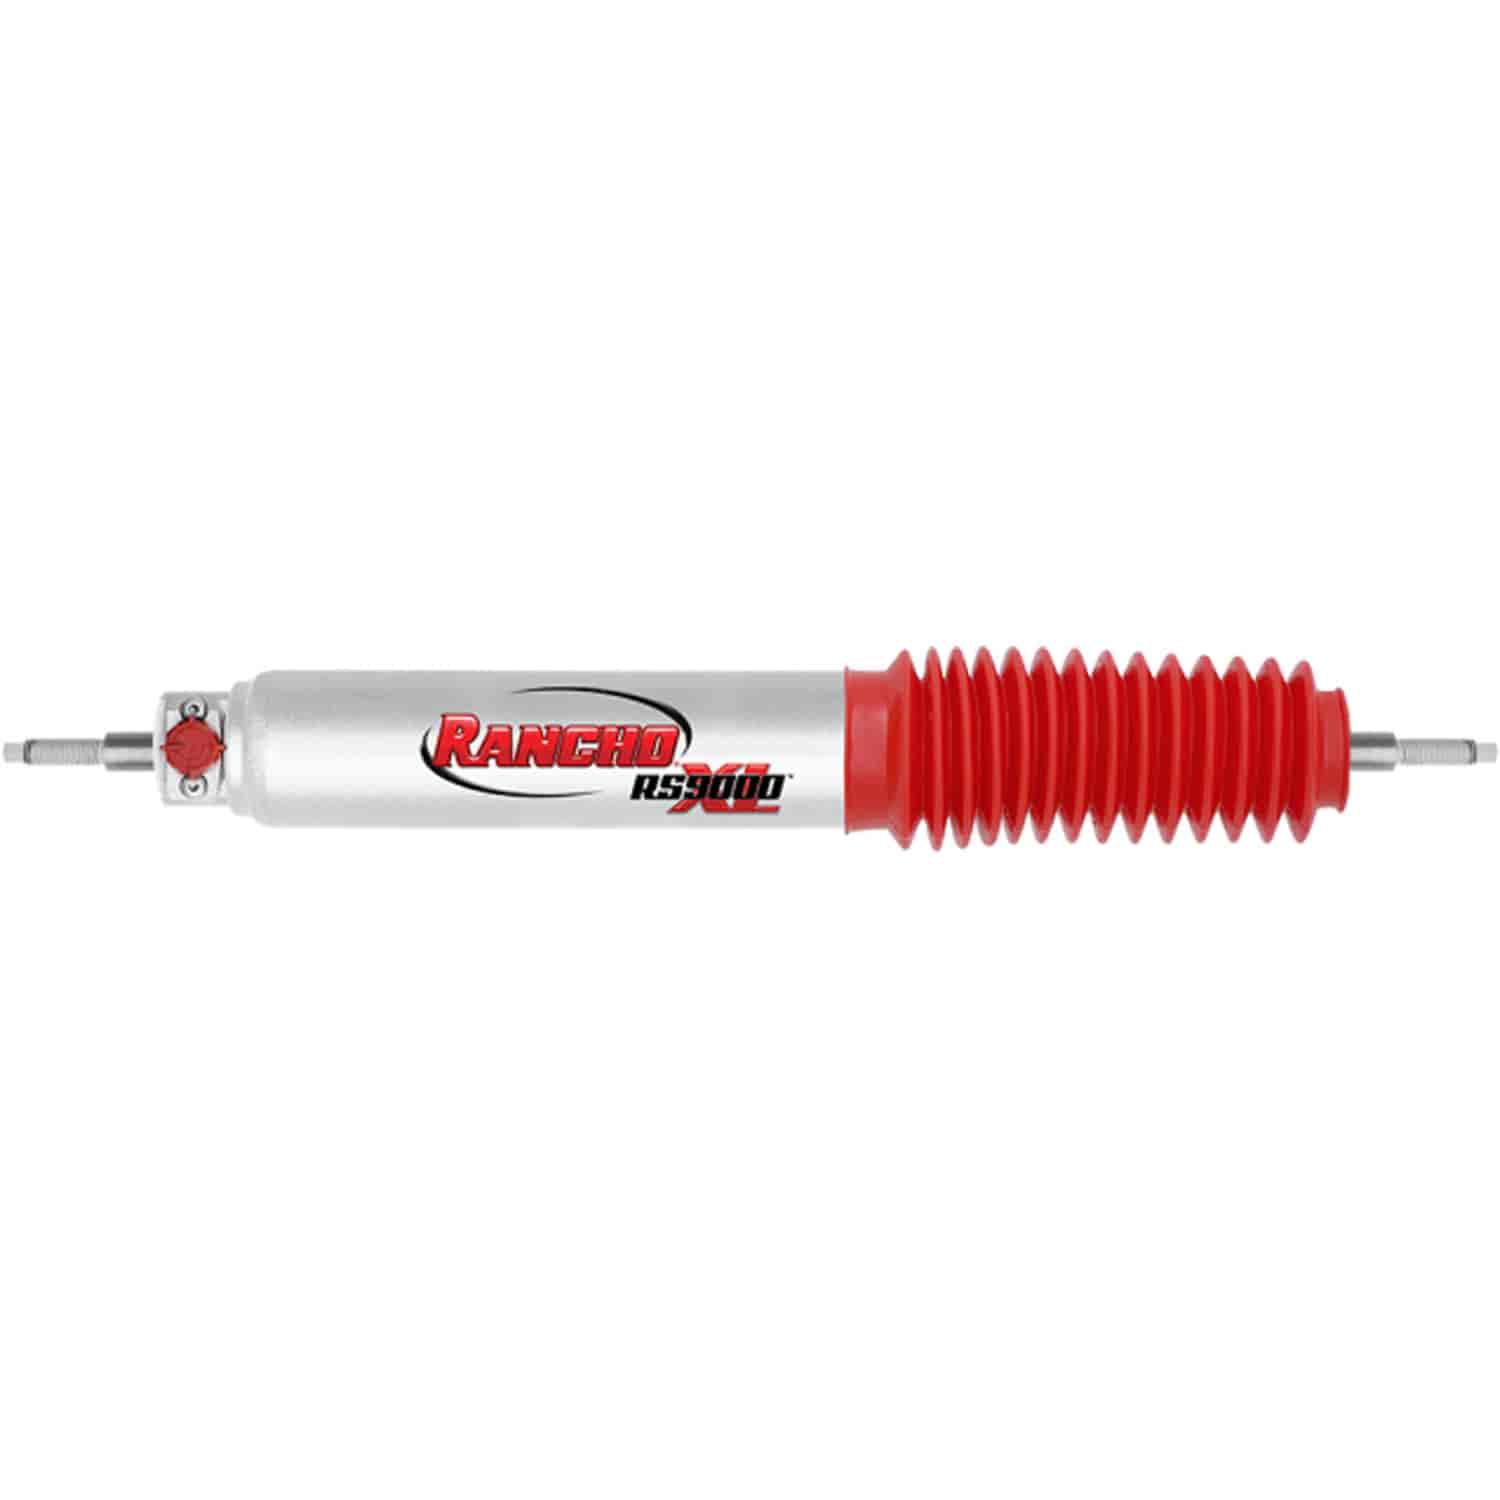 RS9000XL Front Shock Absorber Fits Land Rover Discovery and Range Rover